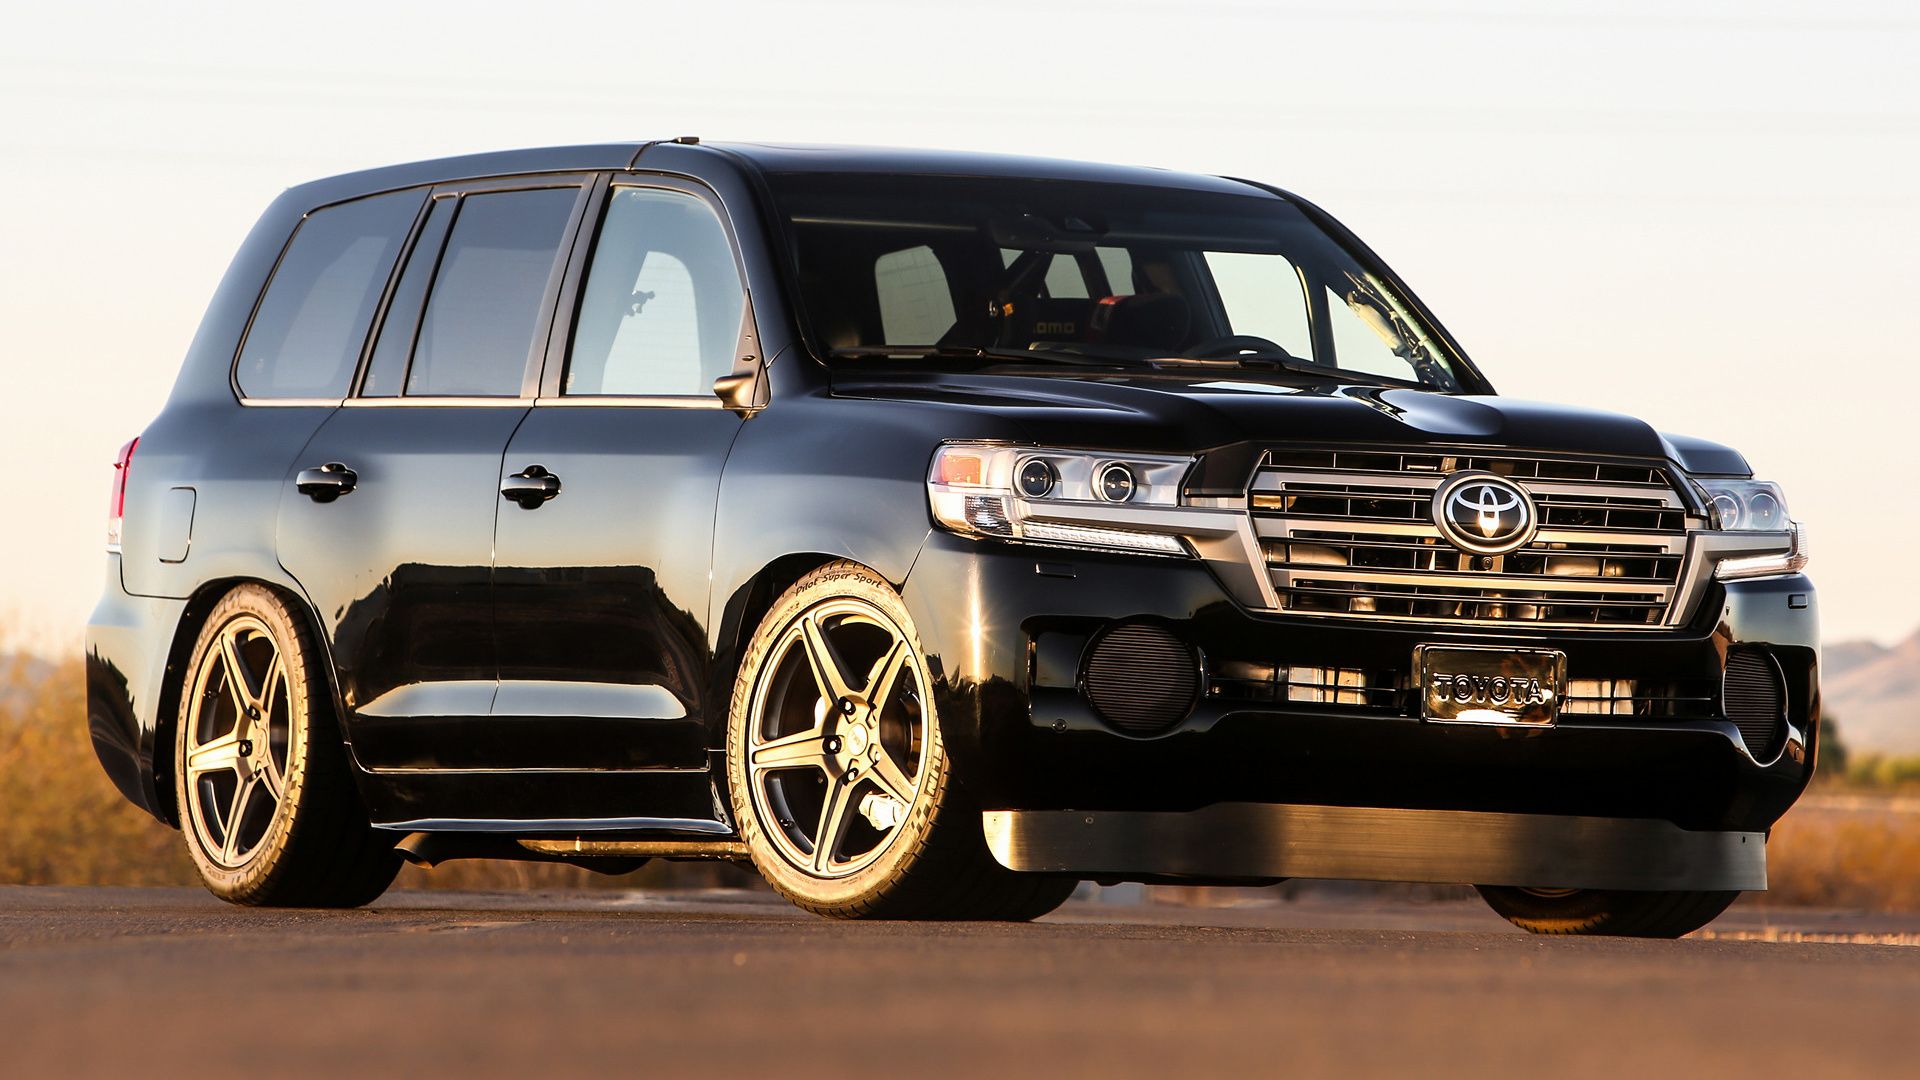 Toyota Land Speed Cruiser and HD Image